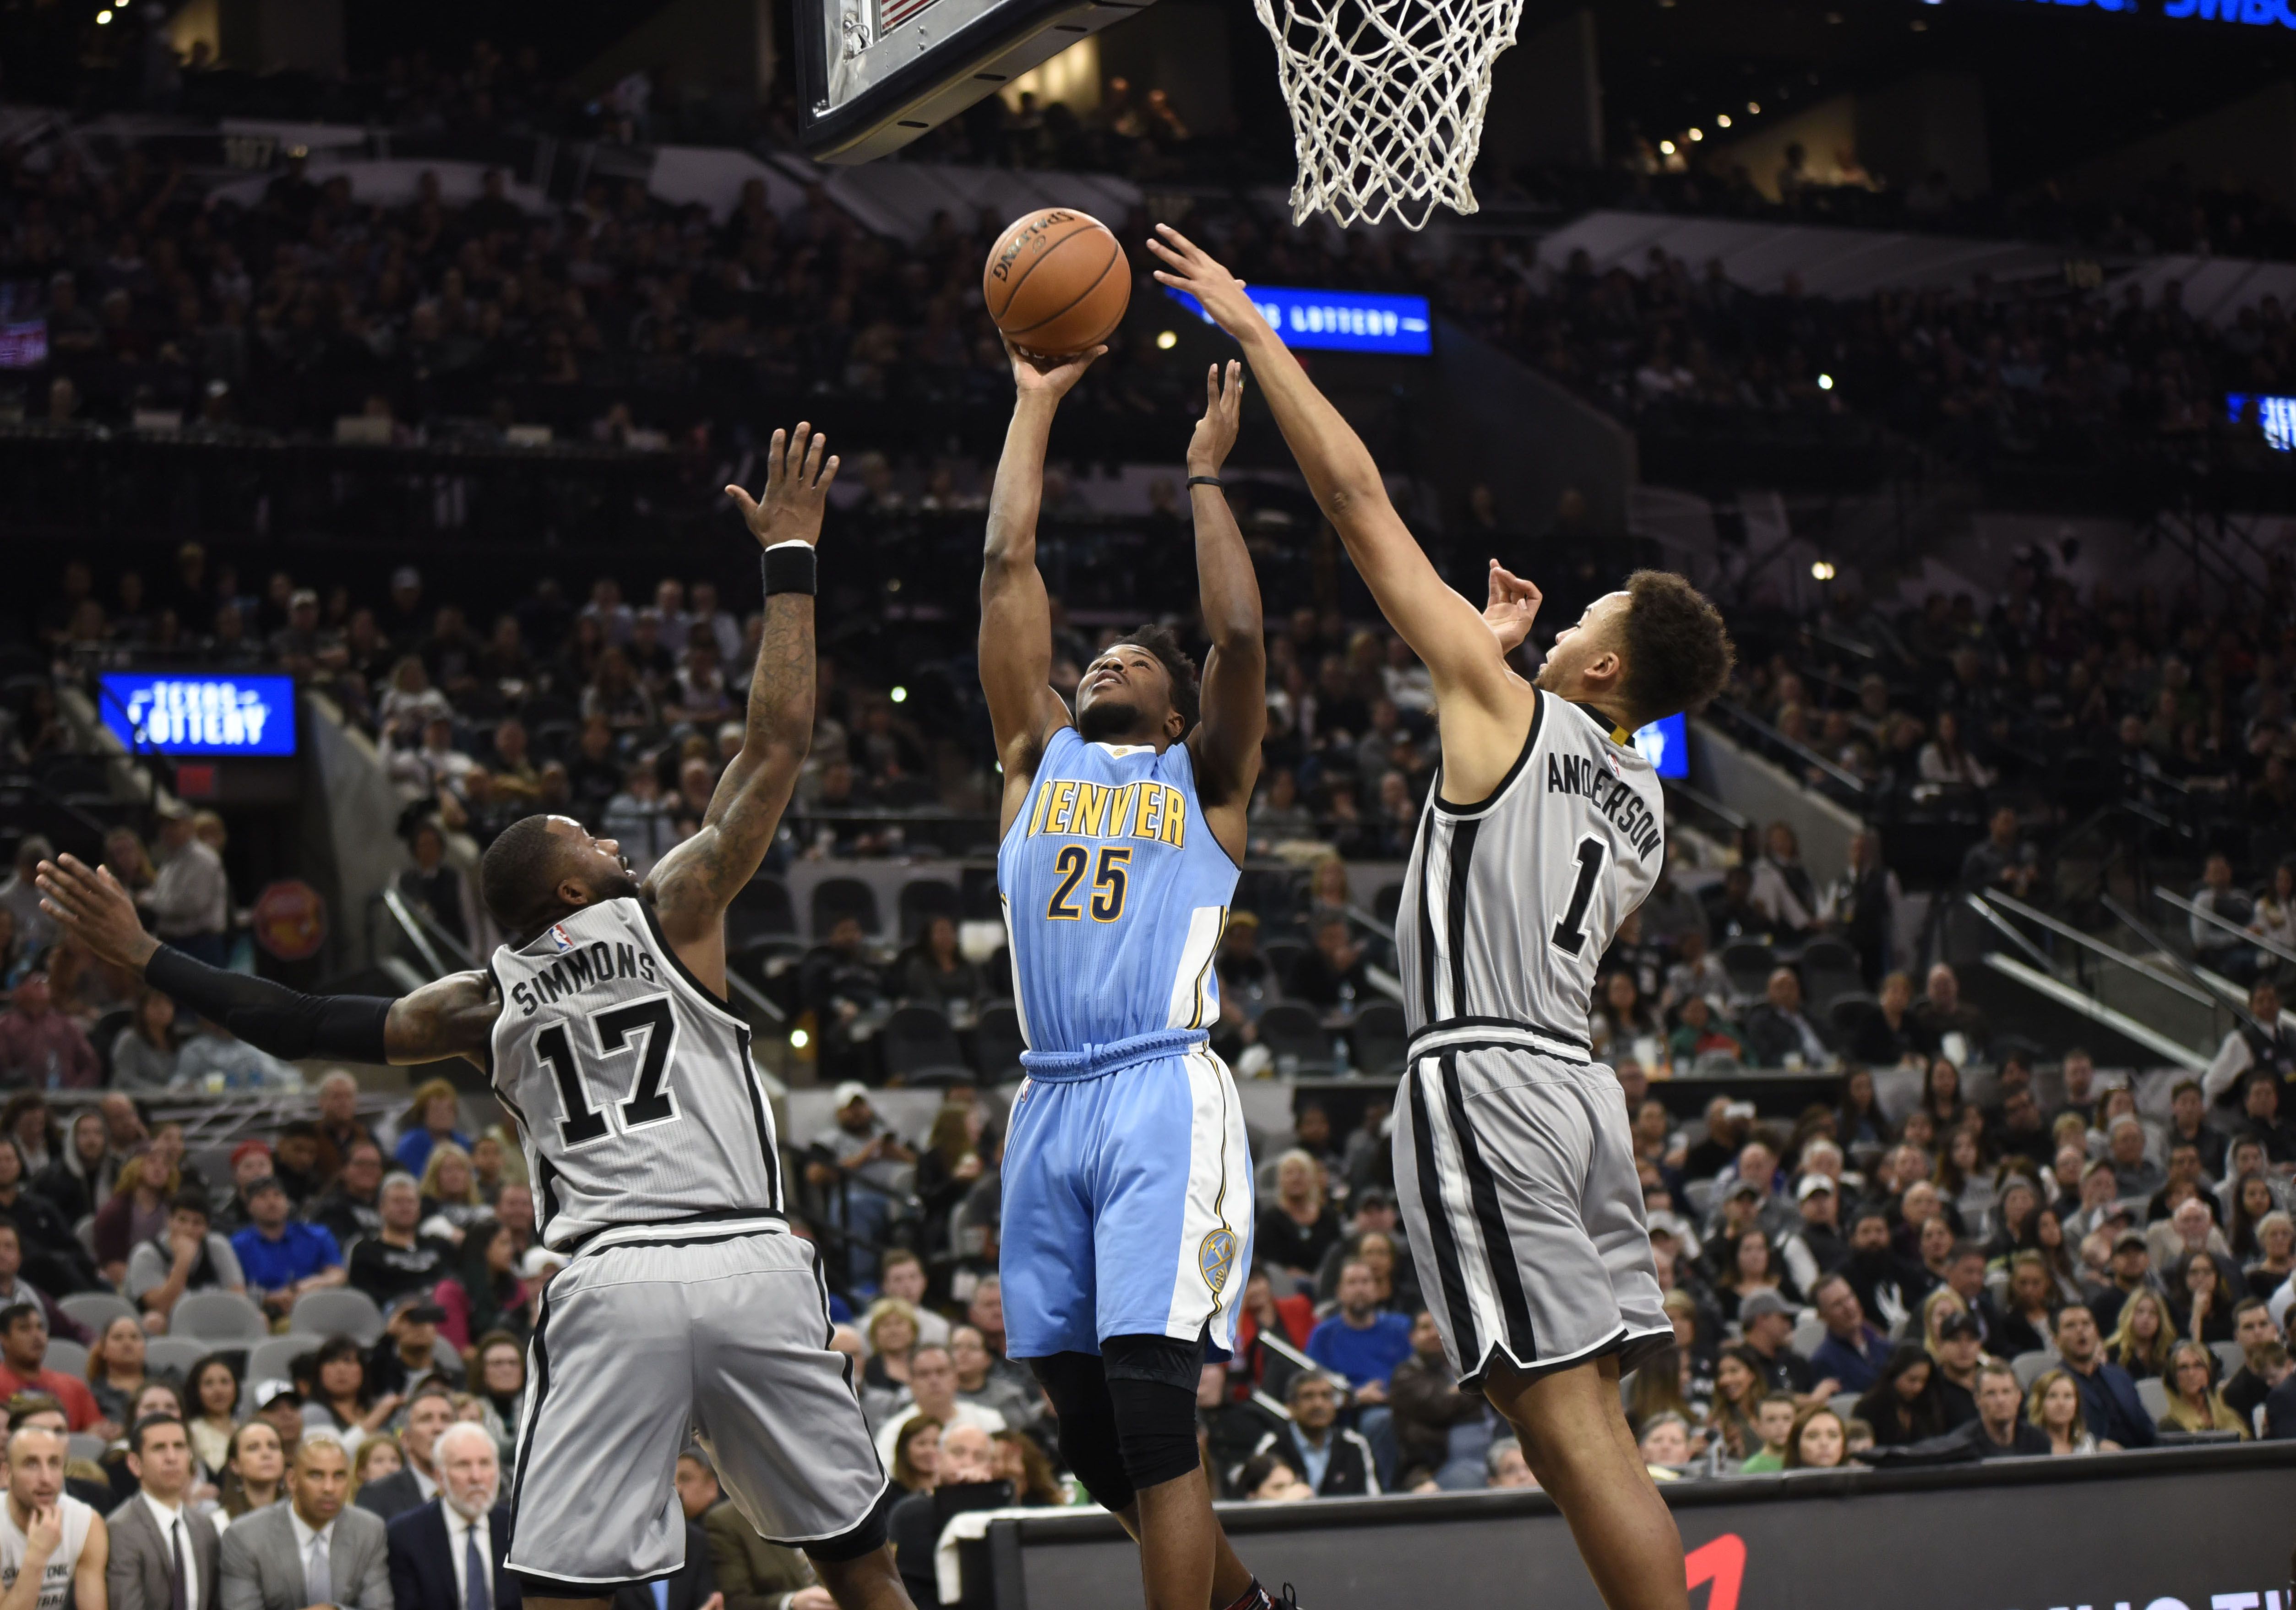 Malik Beasley may have an uncertain future in Denver